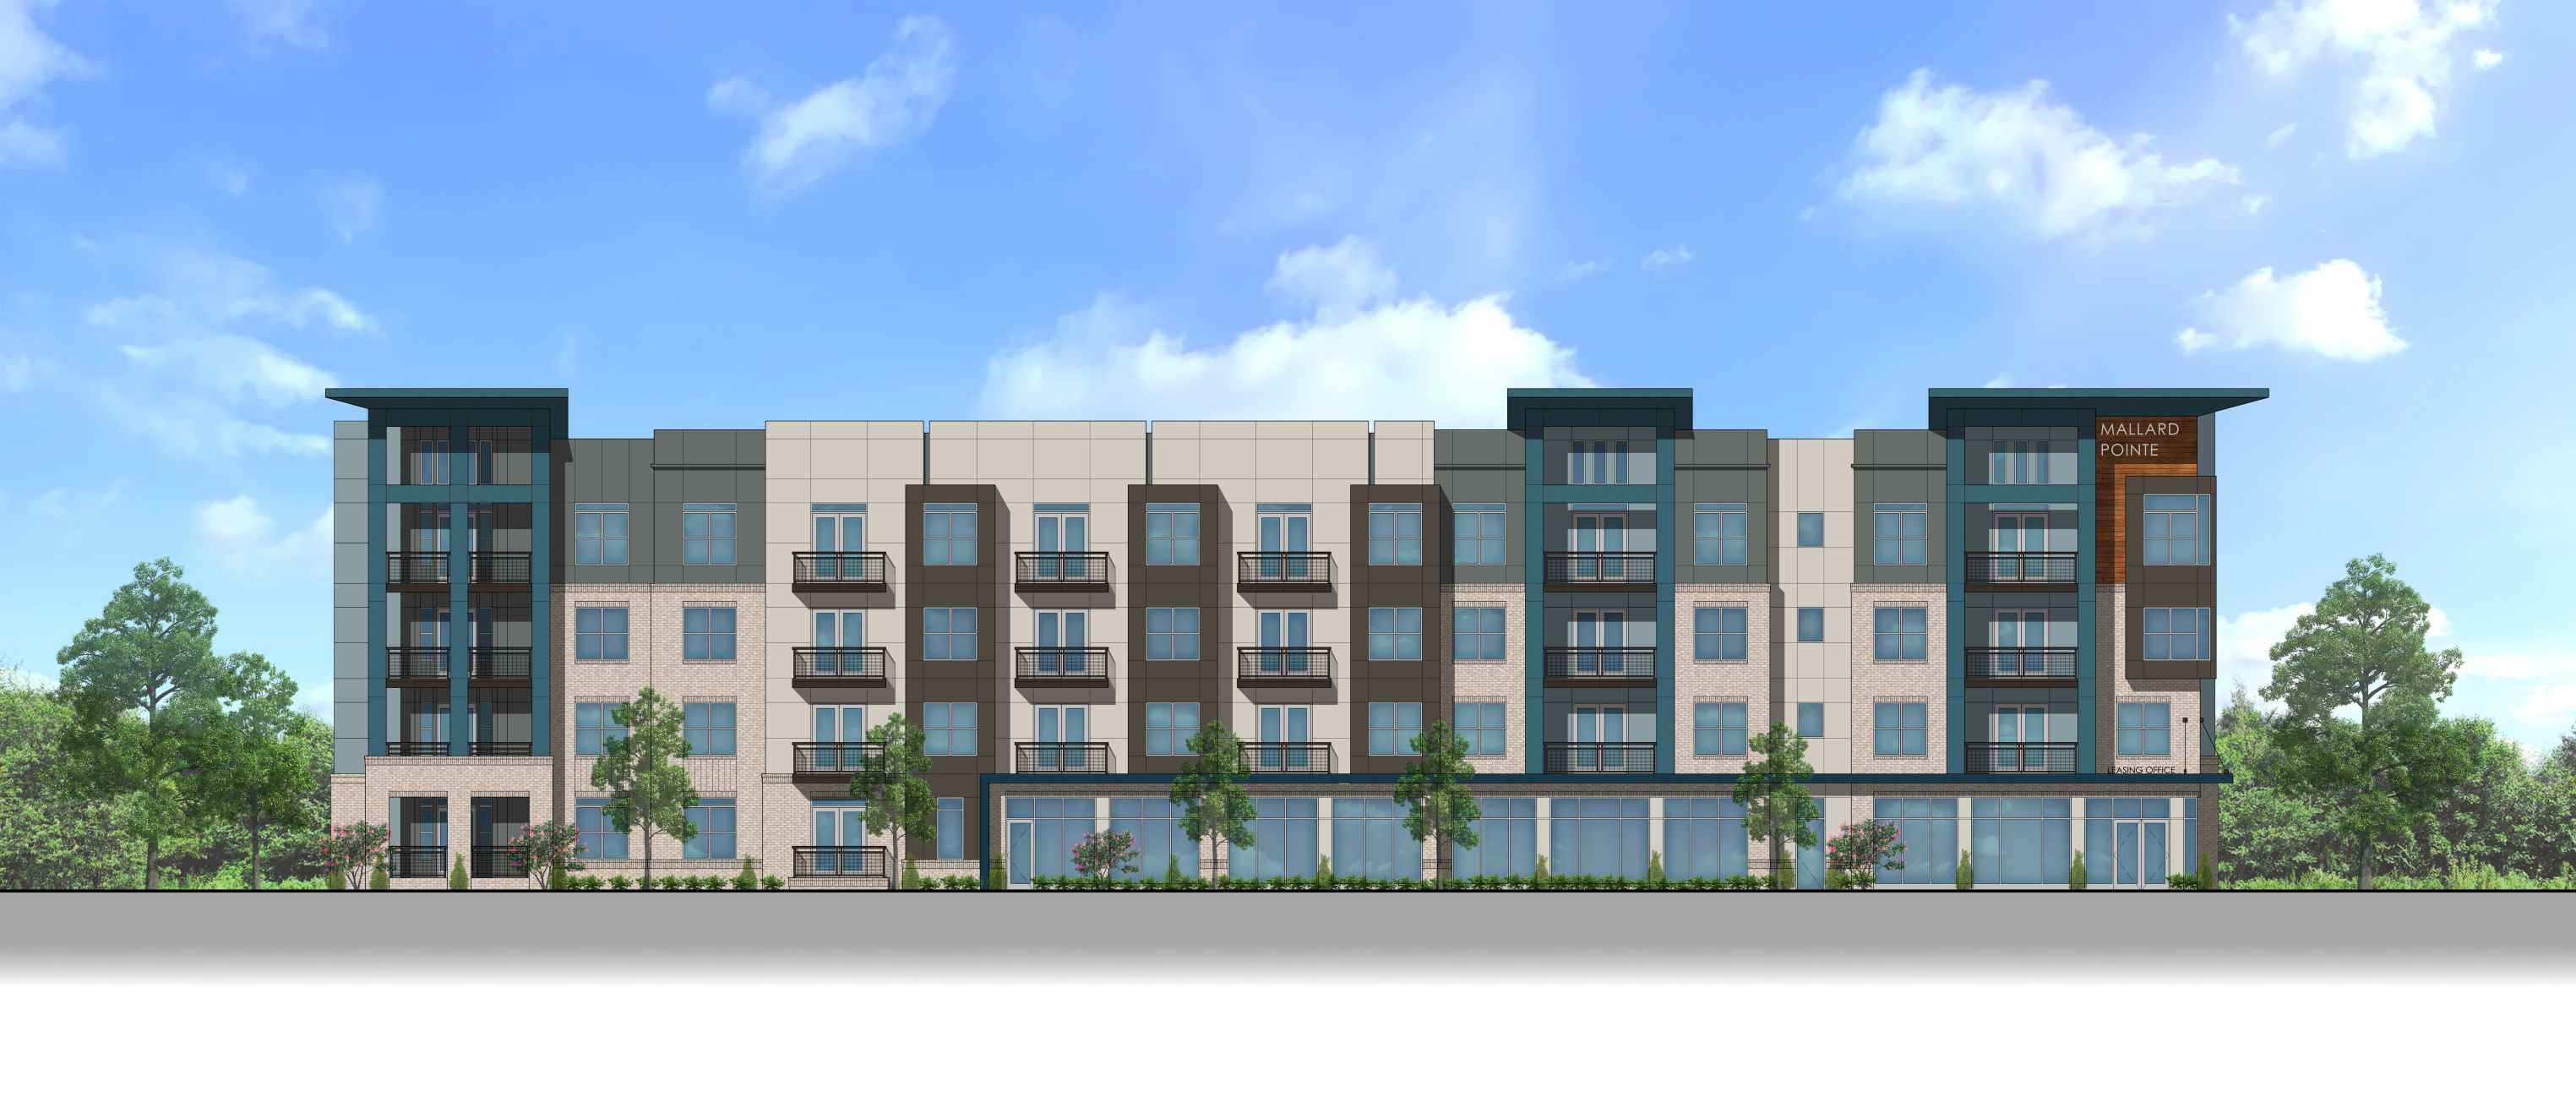 Mallard Pointe, a 260-unit luxury apartment community by High Real Estate Group LLC, will open in 2020 at 11030 David Taylor Drive in Charlotte, N.C.